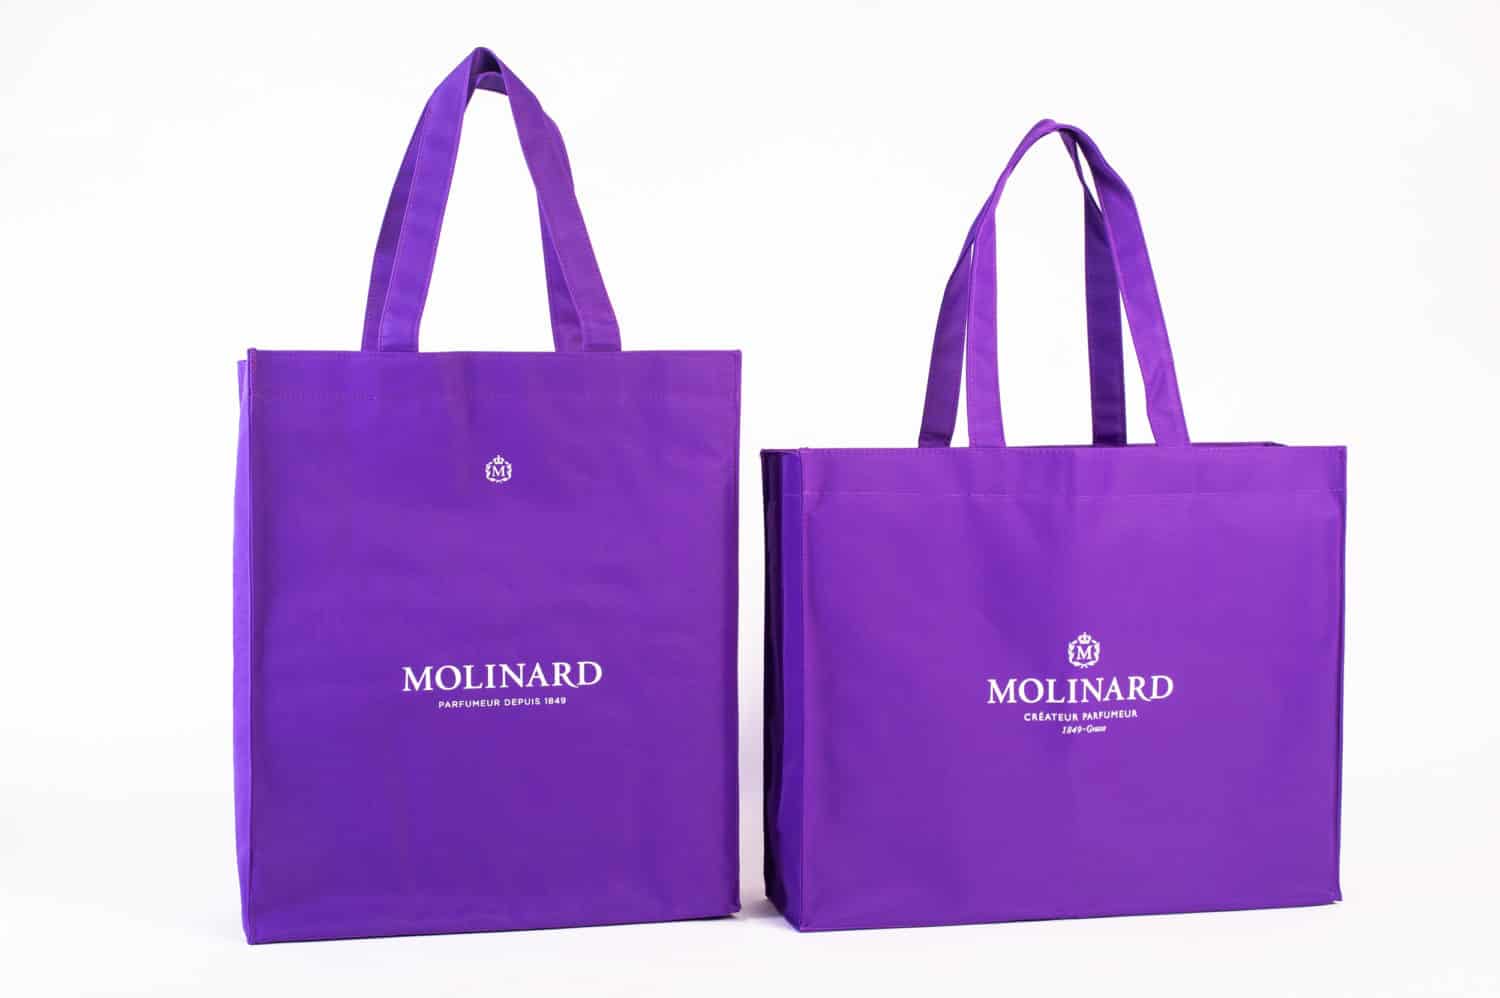 Design and manufacture of custom-made shopping bags - Design Duval